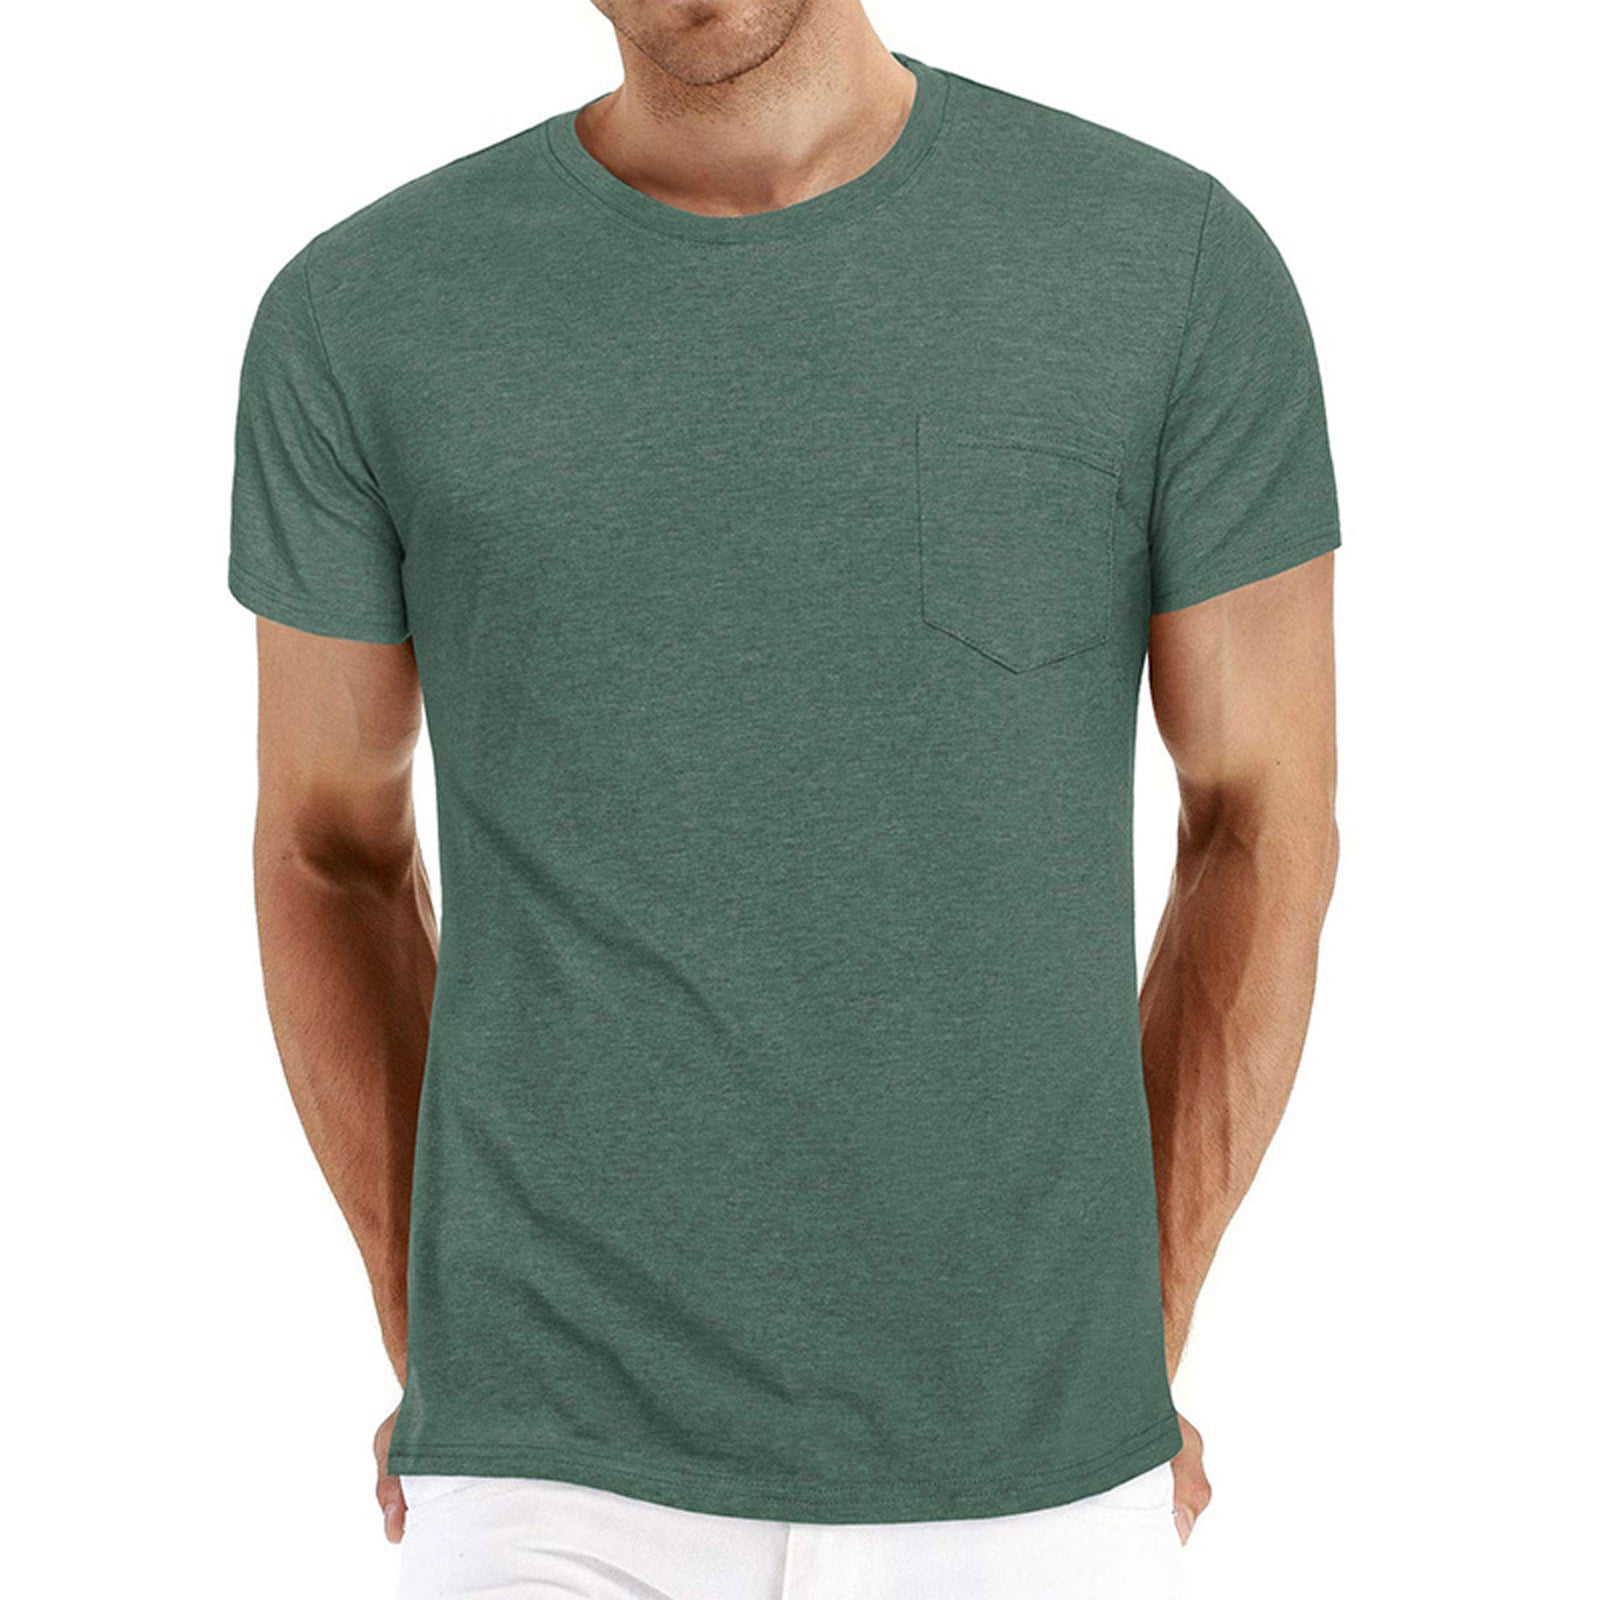 Mens Casual Top Solid Color Short Sleeve T-shirt Crew Neck Tee Basic Gym Cotton 